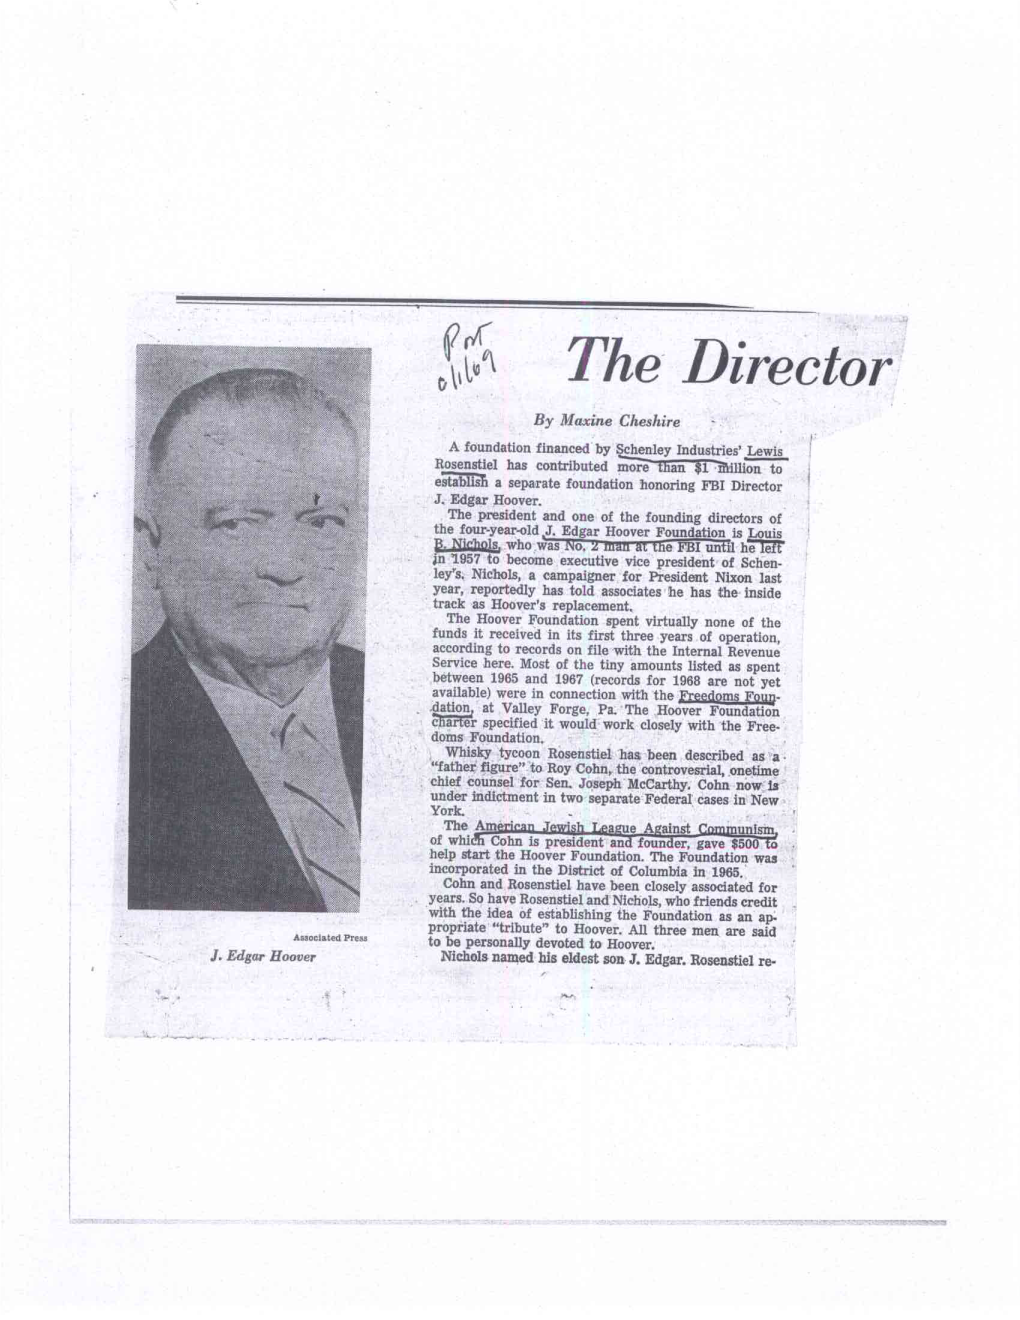 J. Edgar Hoover. the President and One of the Founding Directors of the Four-Year-Old J